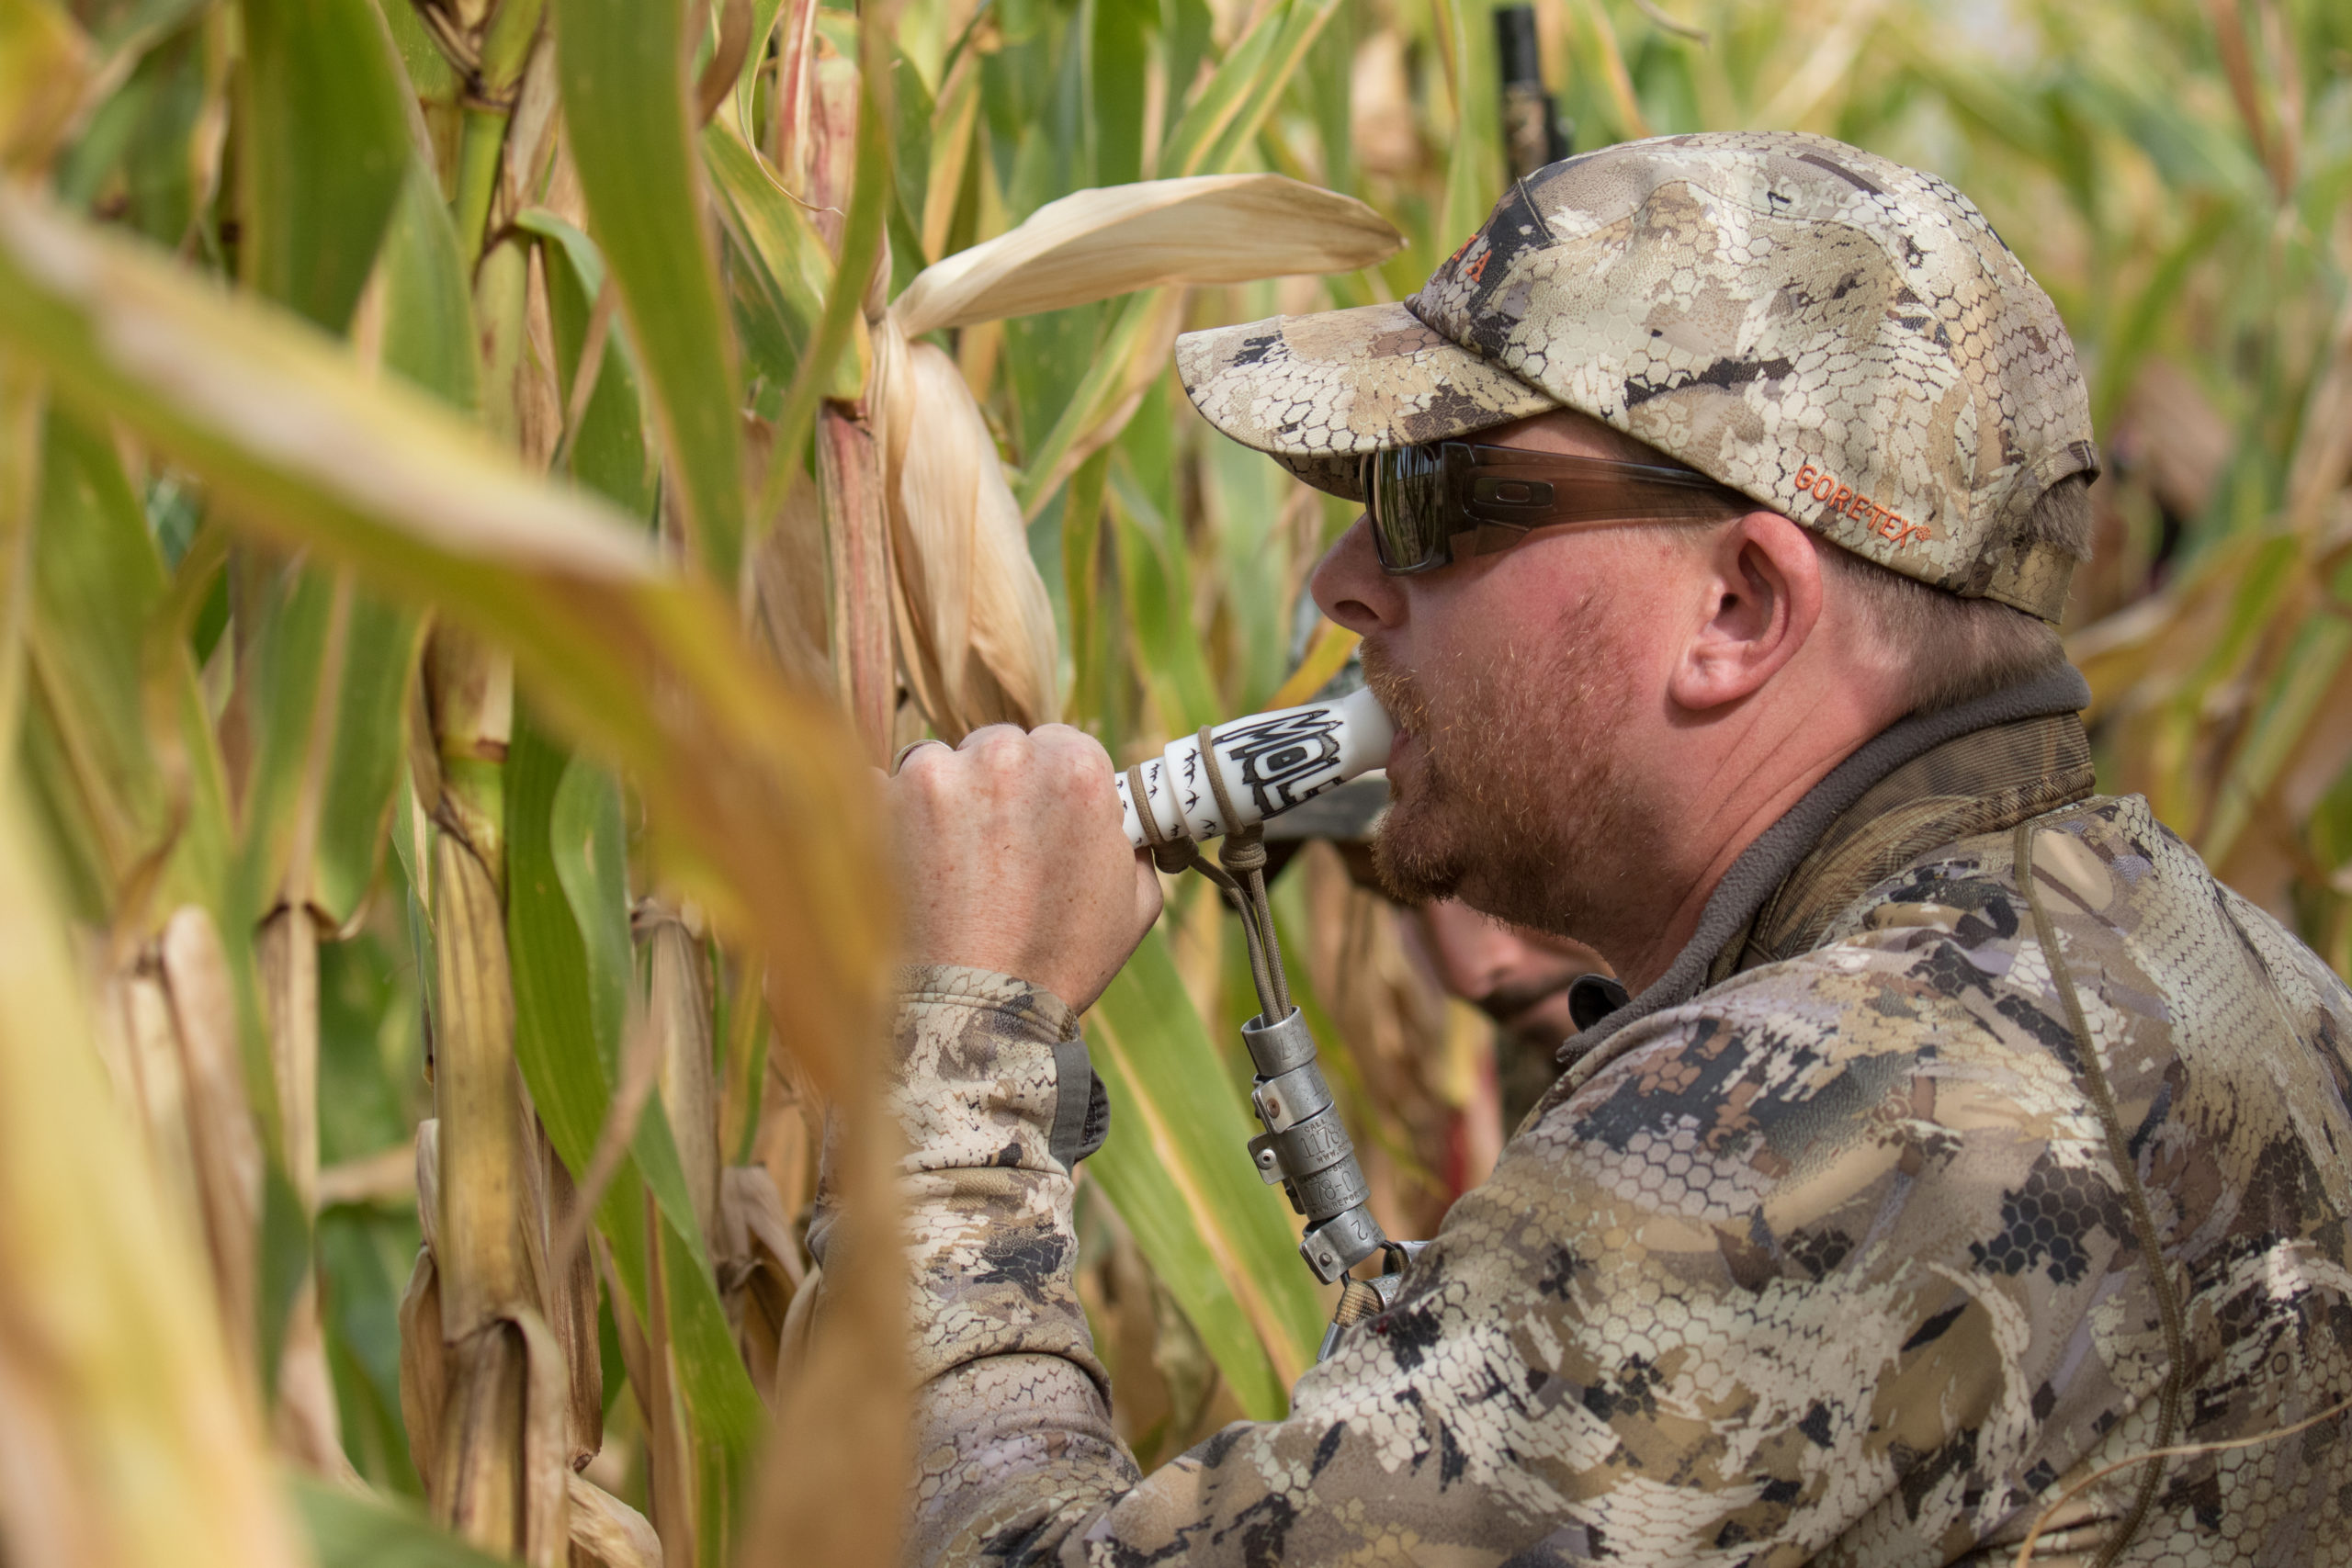 hunter calling in birds while hunting. Delta signs a letter opposing anti hunting measure